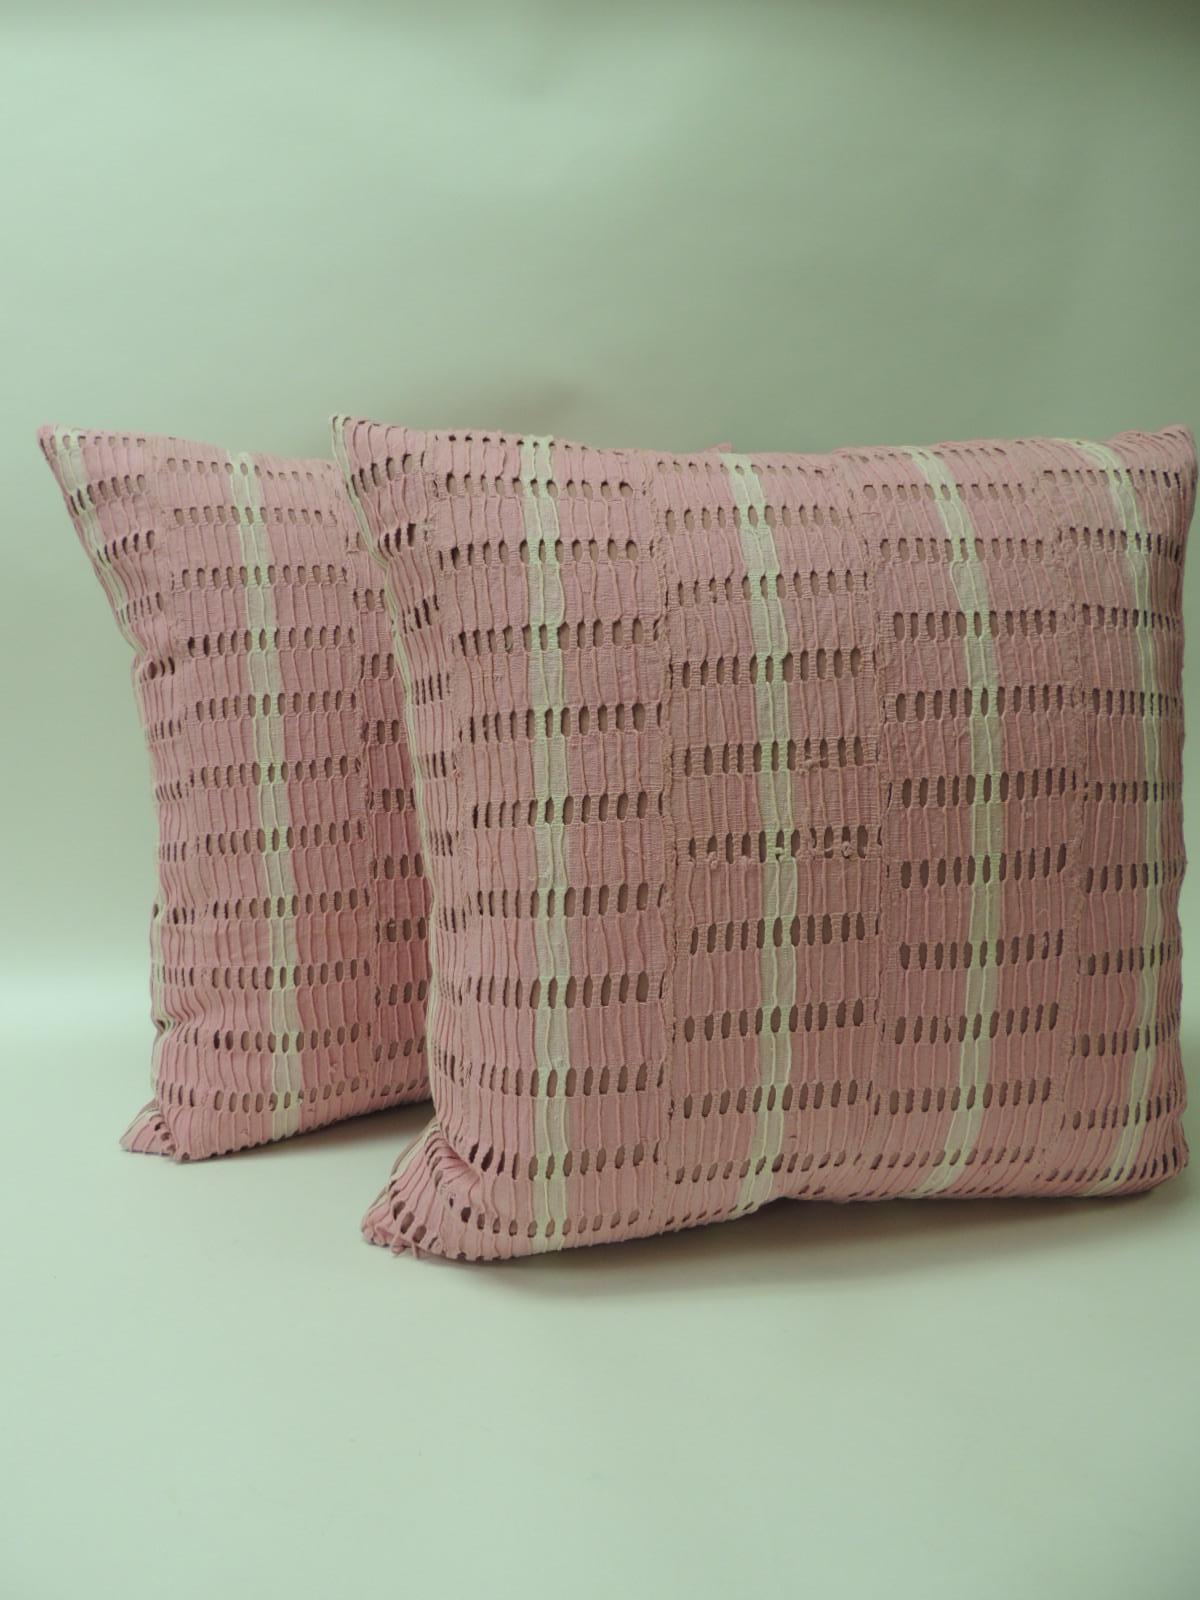 Vintage pink and natural African woven decorative throw pillows.
Yoruba textiles with dusty pink underlining and backing in cotton.
Closed by stitch (no zipper.) Handcrafted and designed in the USA with custom made pillow inserts.
Note: Four